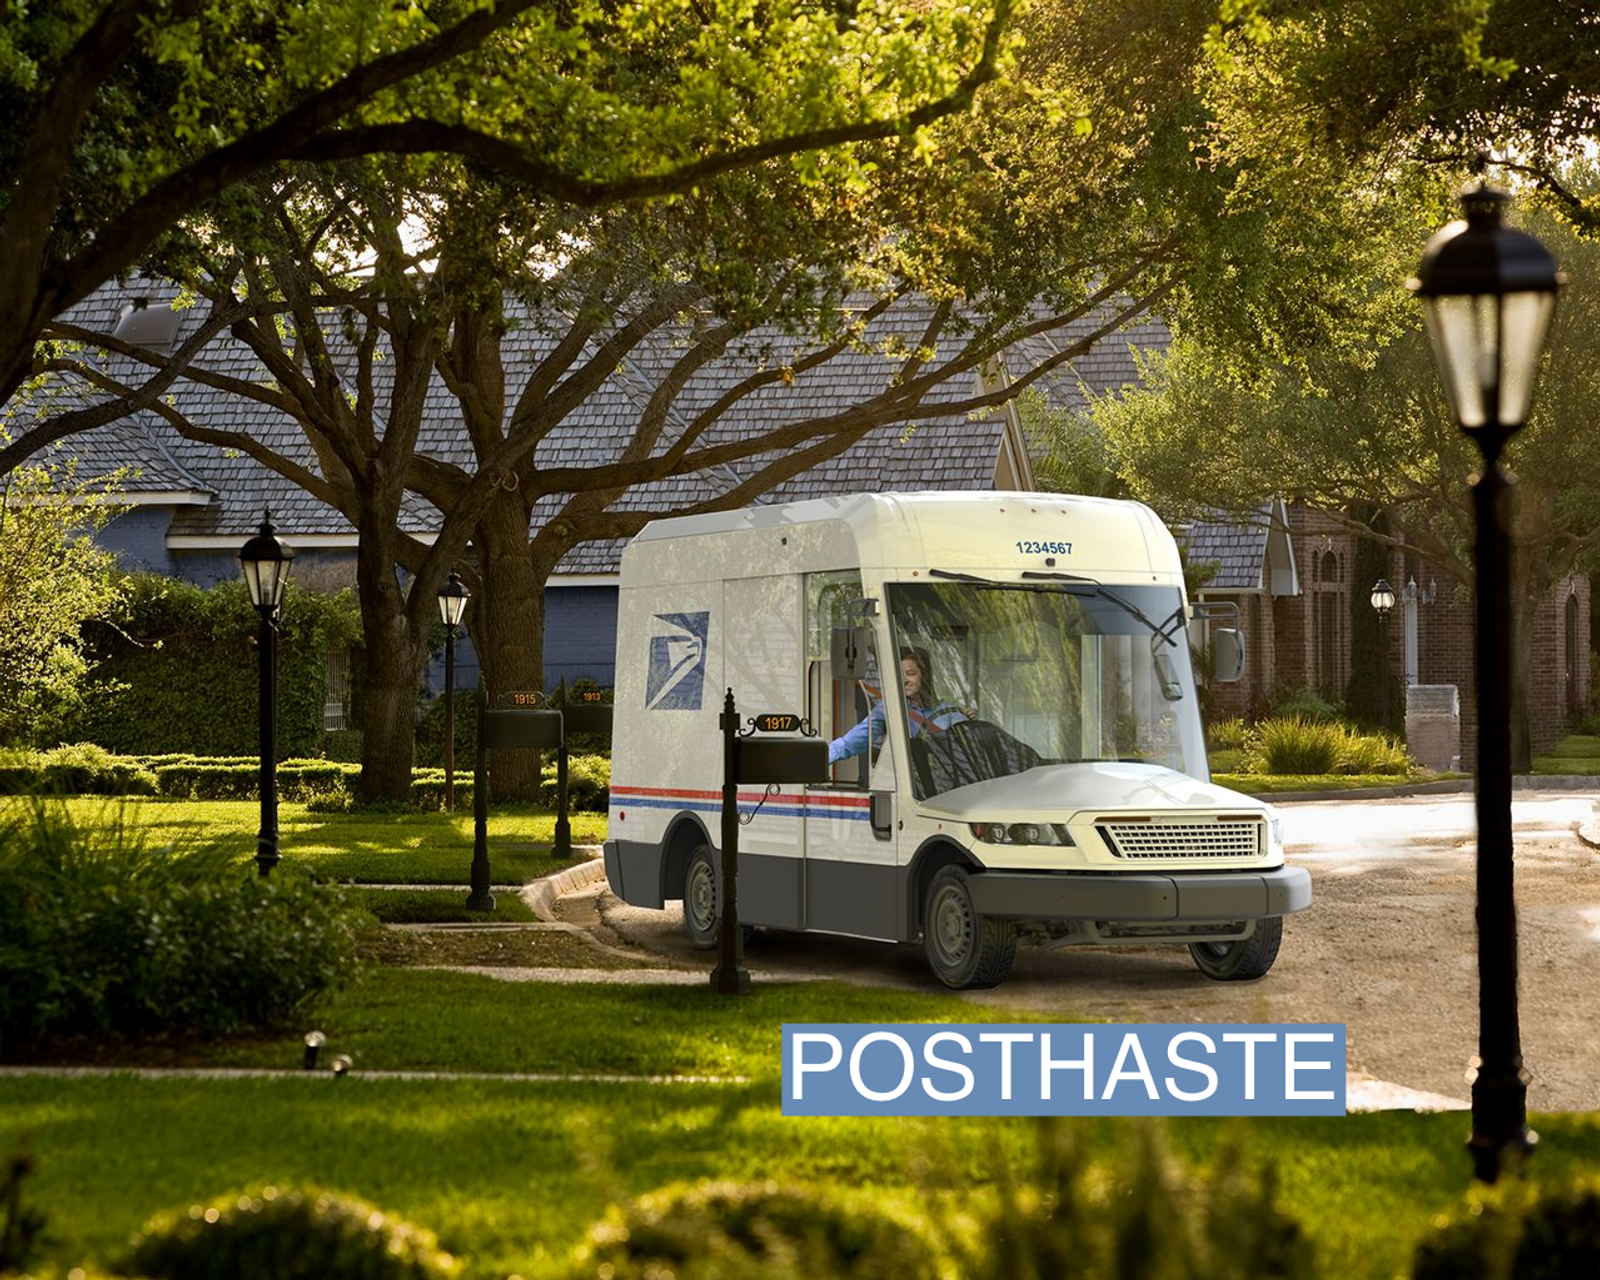 The USPS Next Generation Delivery Vehicle